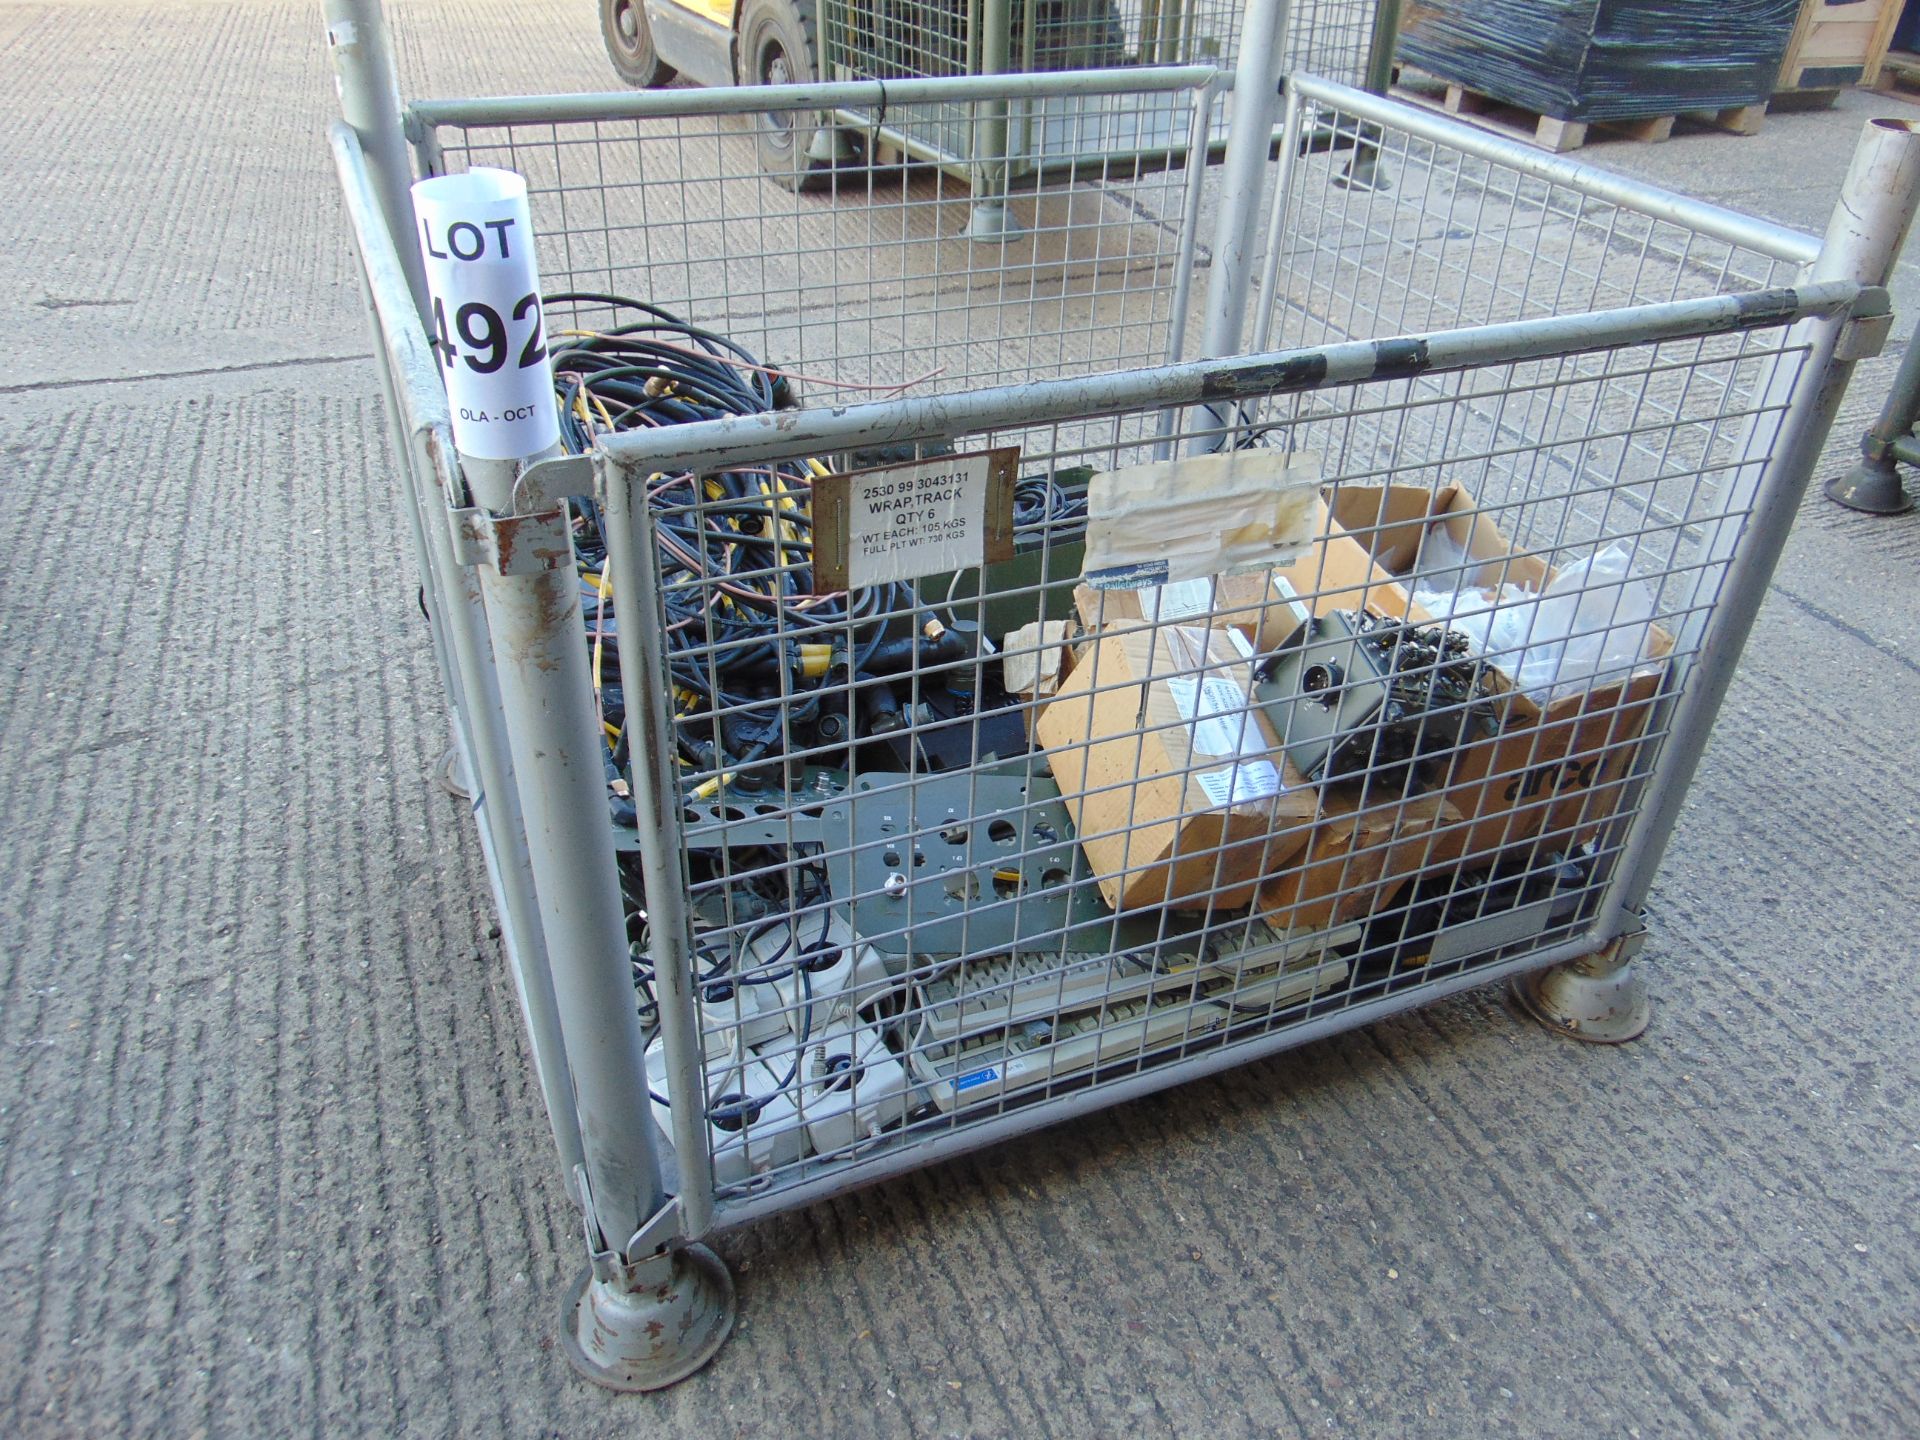 1 x Stillage of Comms Equipment and Spares, Cables etc